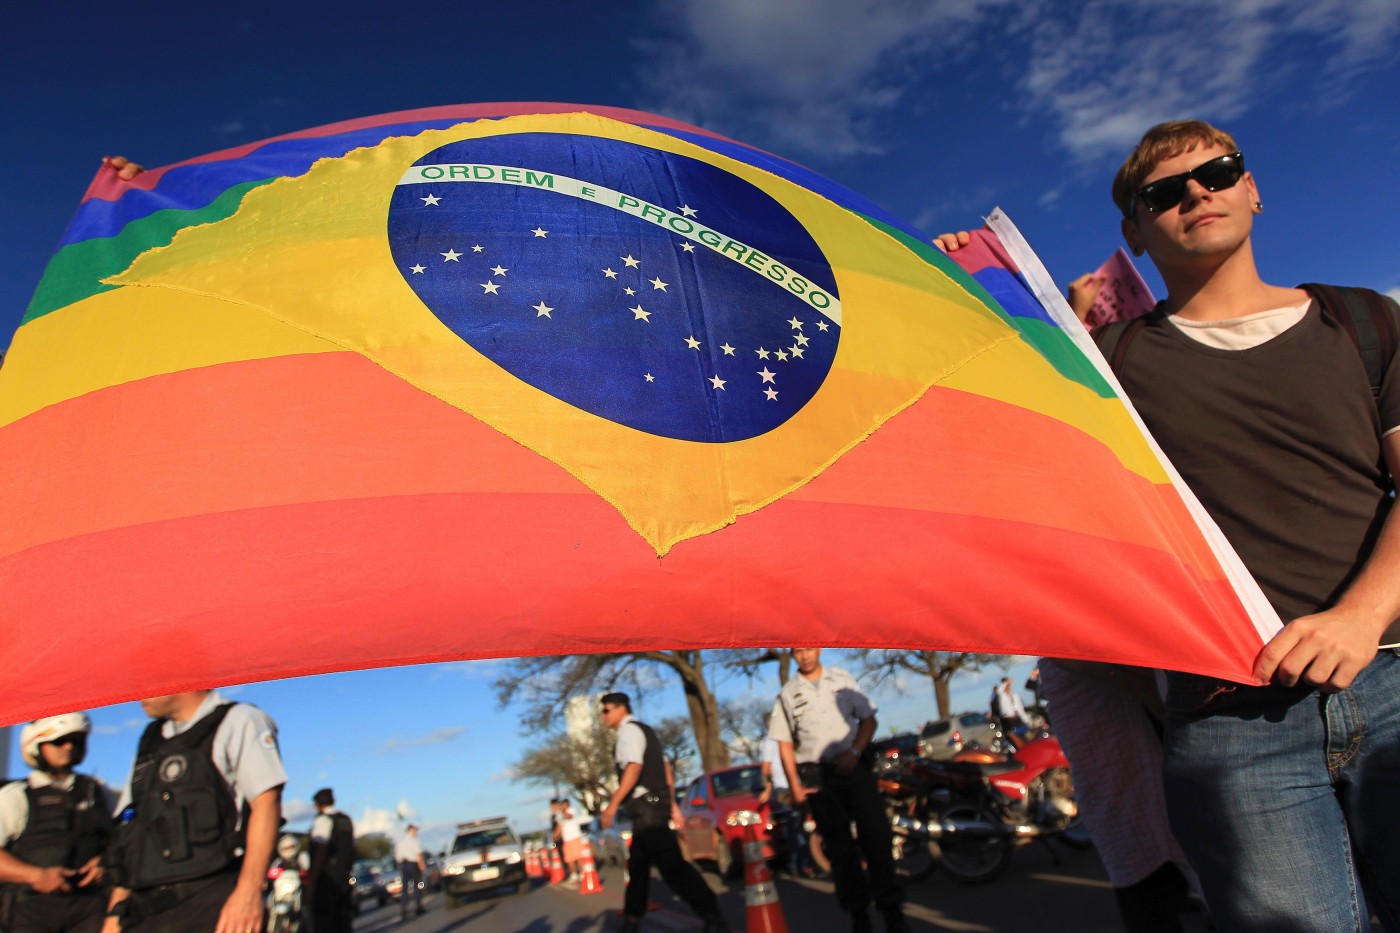 Brazil is the country where the largest number of LGBTIQ+ people die globally.